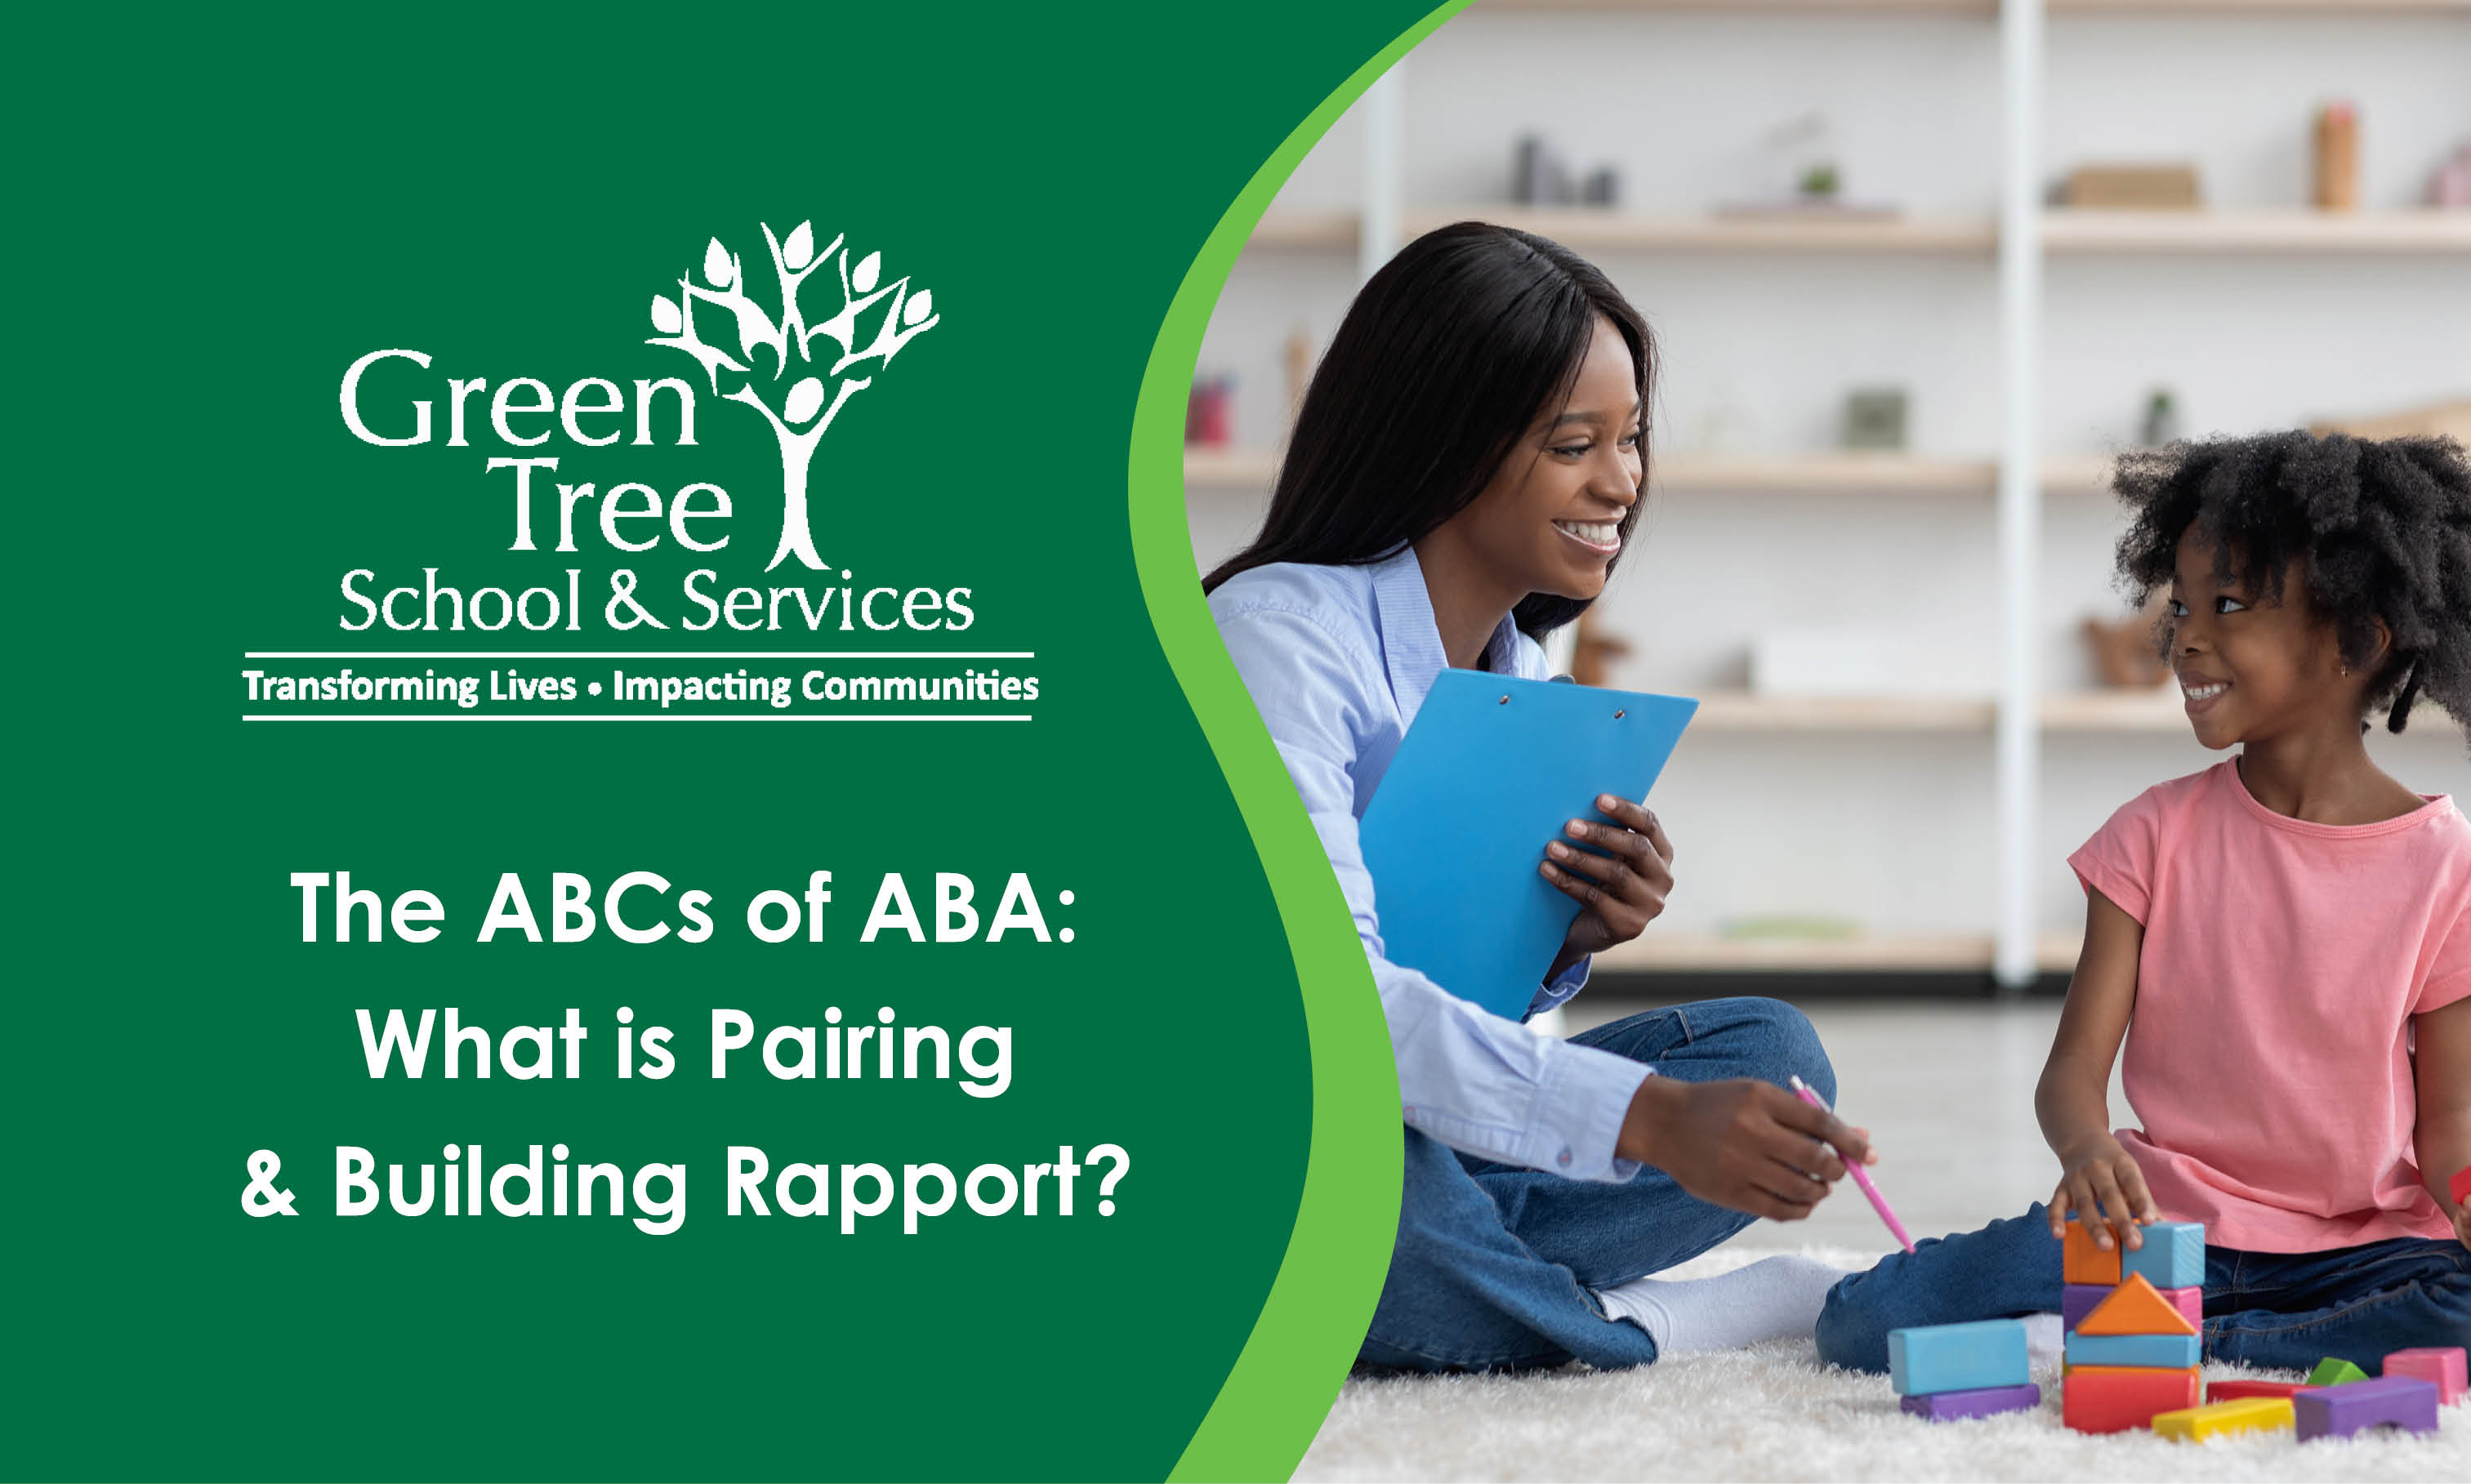 The ABCs of ABA: What is Pairing & Building Rapport?